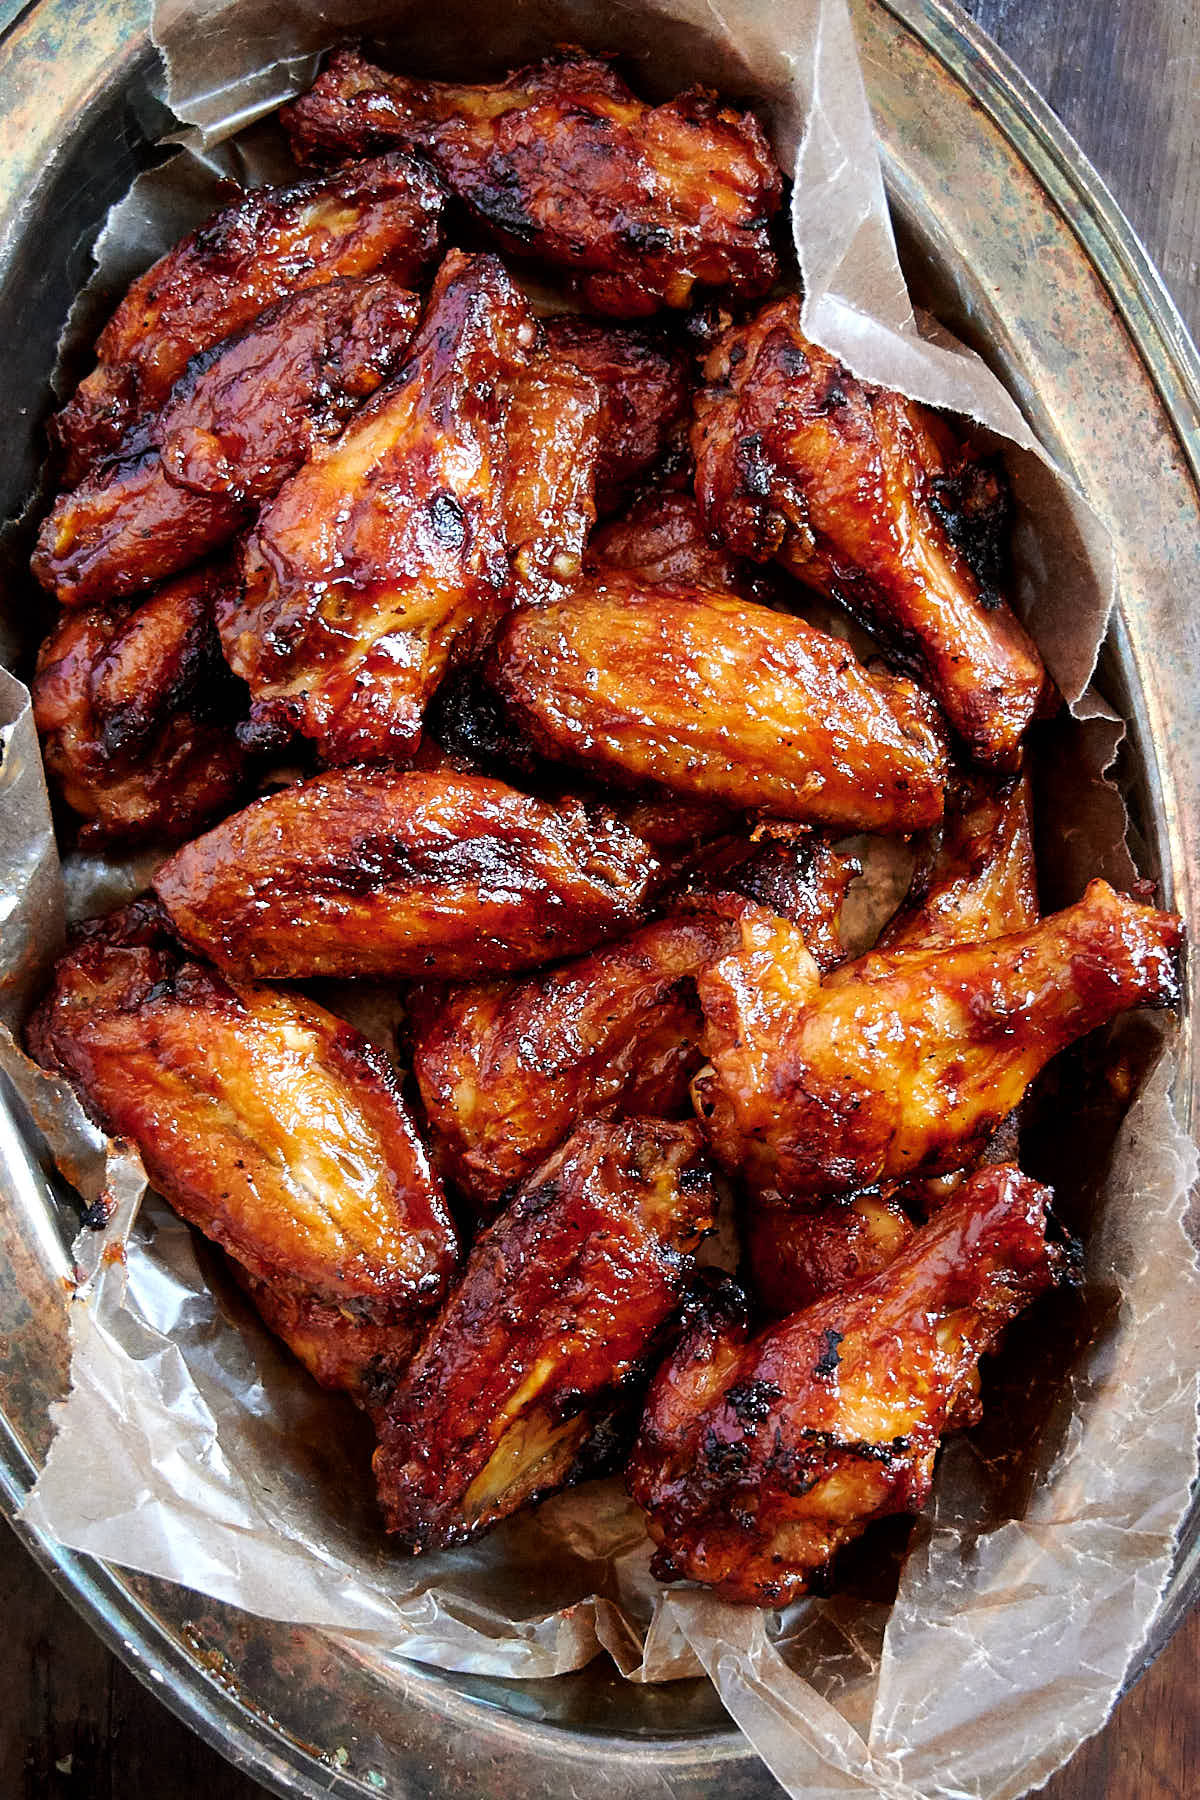 Baking Barbecue Chicken Wings Awesome Baked Bbq Chicken Wings I Food Blogger